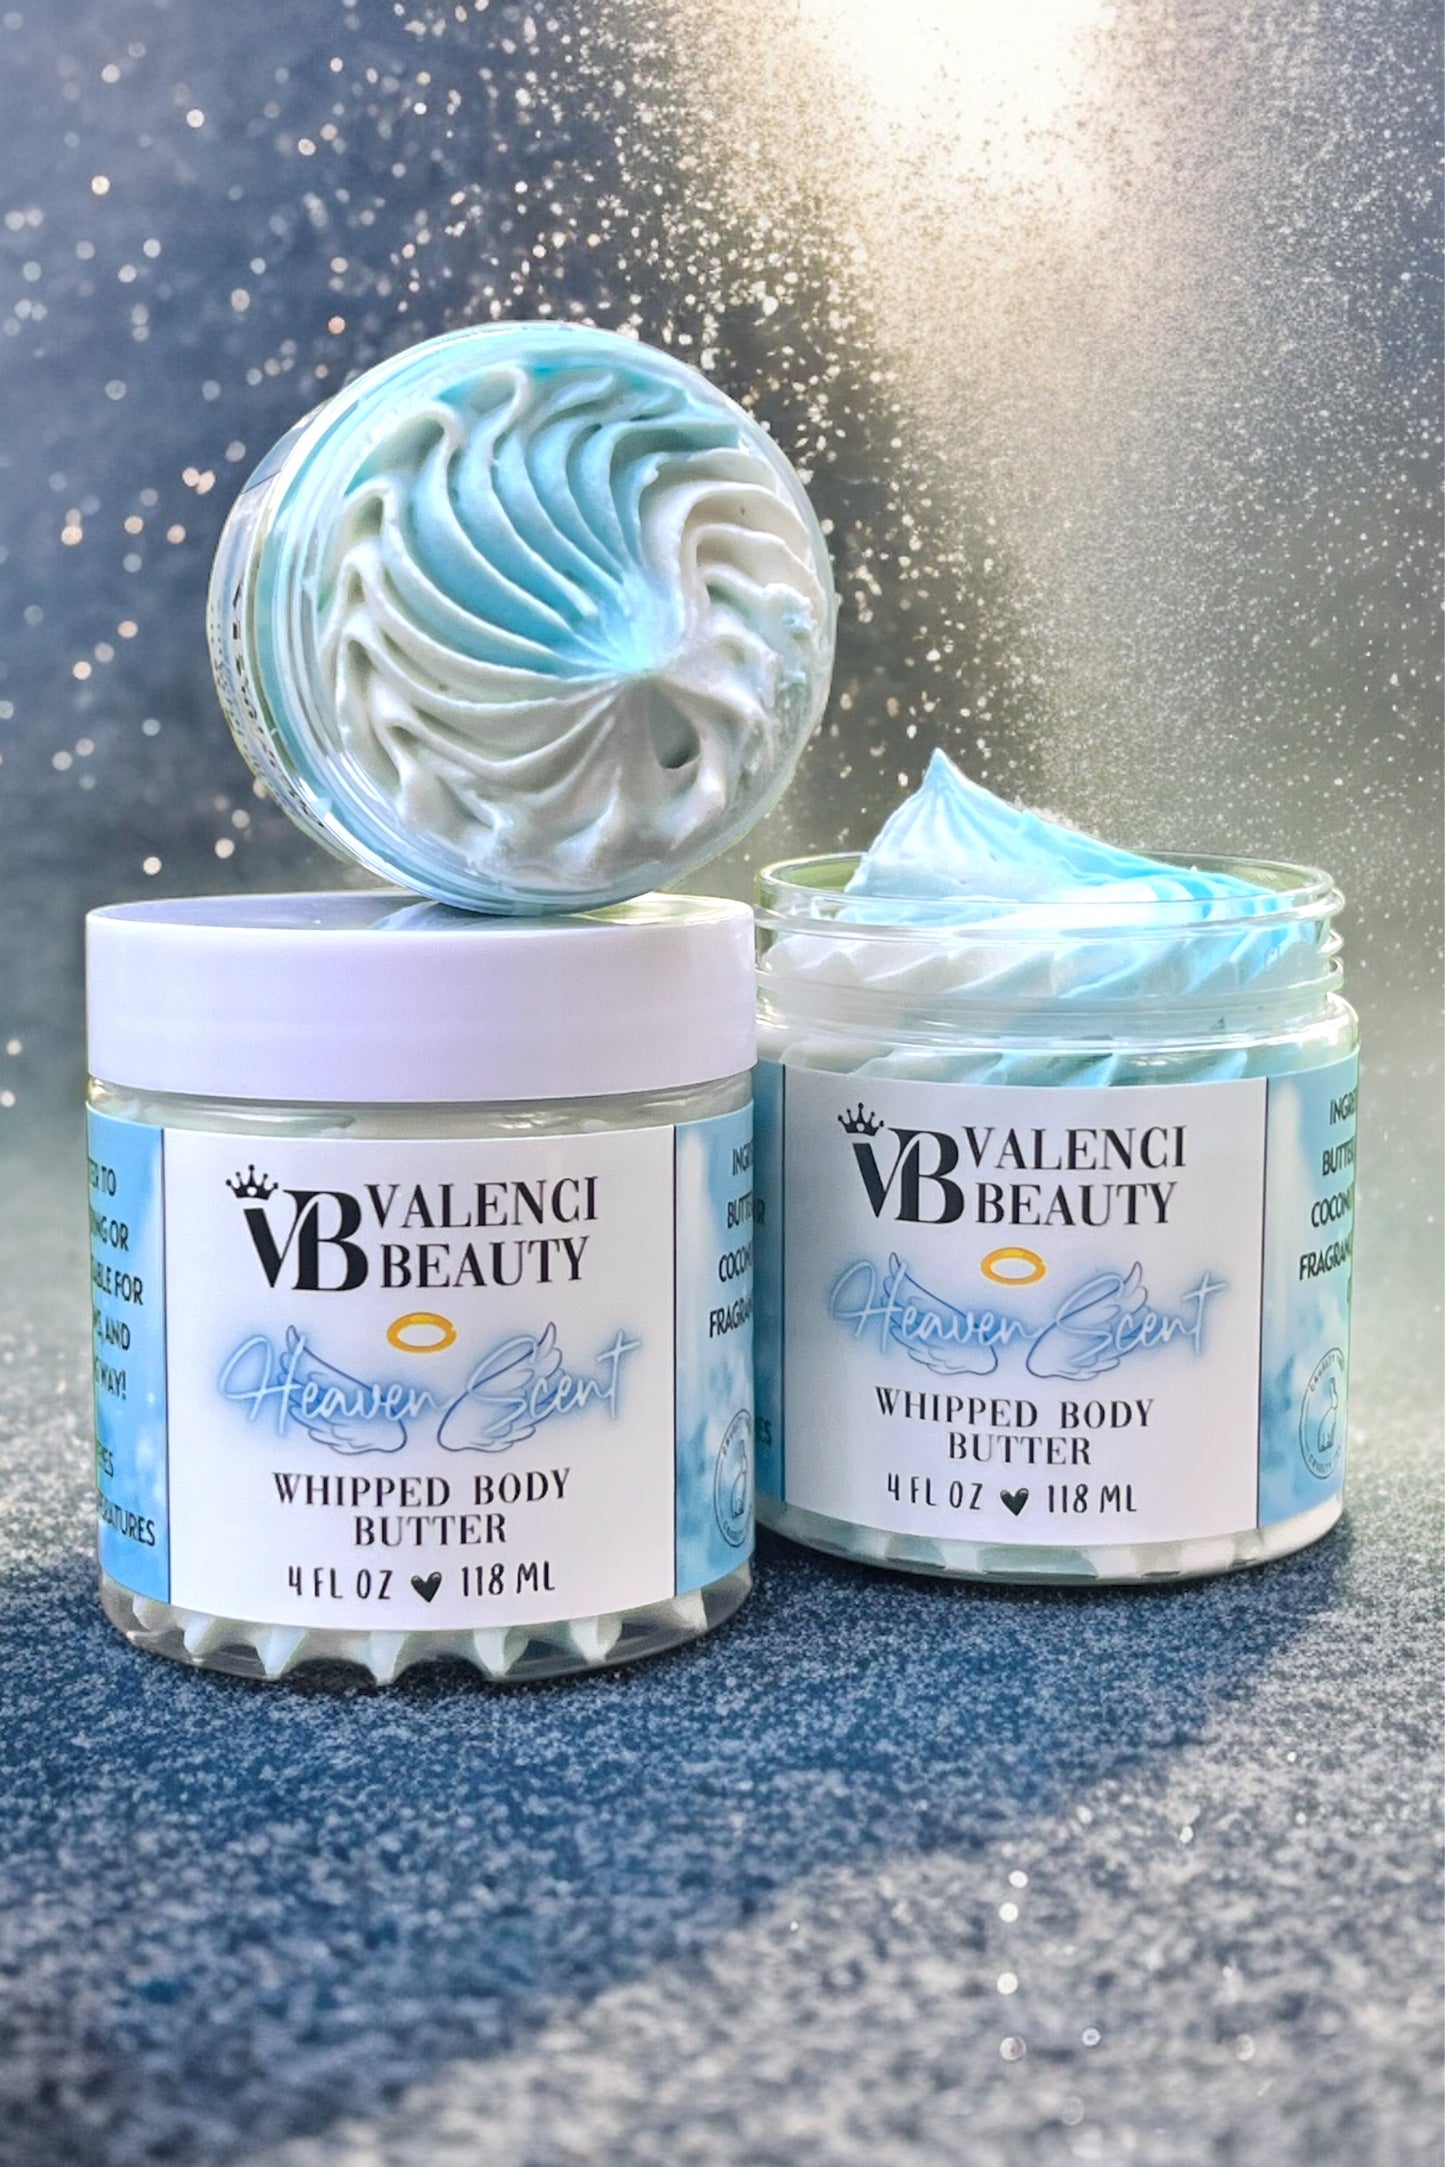 "Heaven Scent" Whipped Body Butter